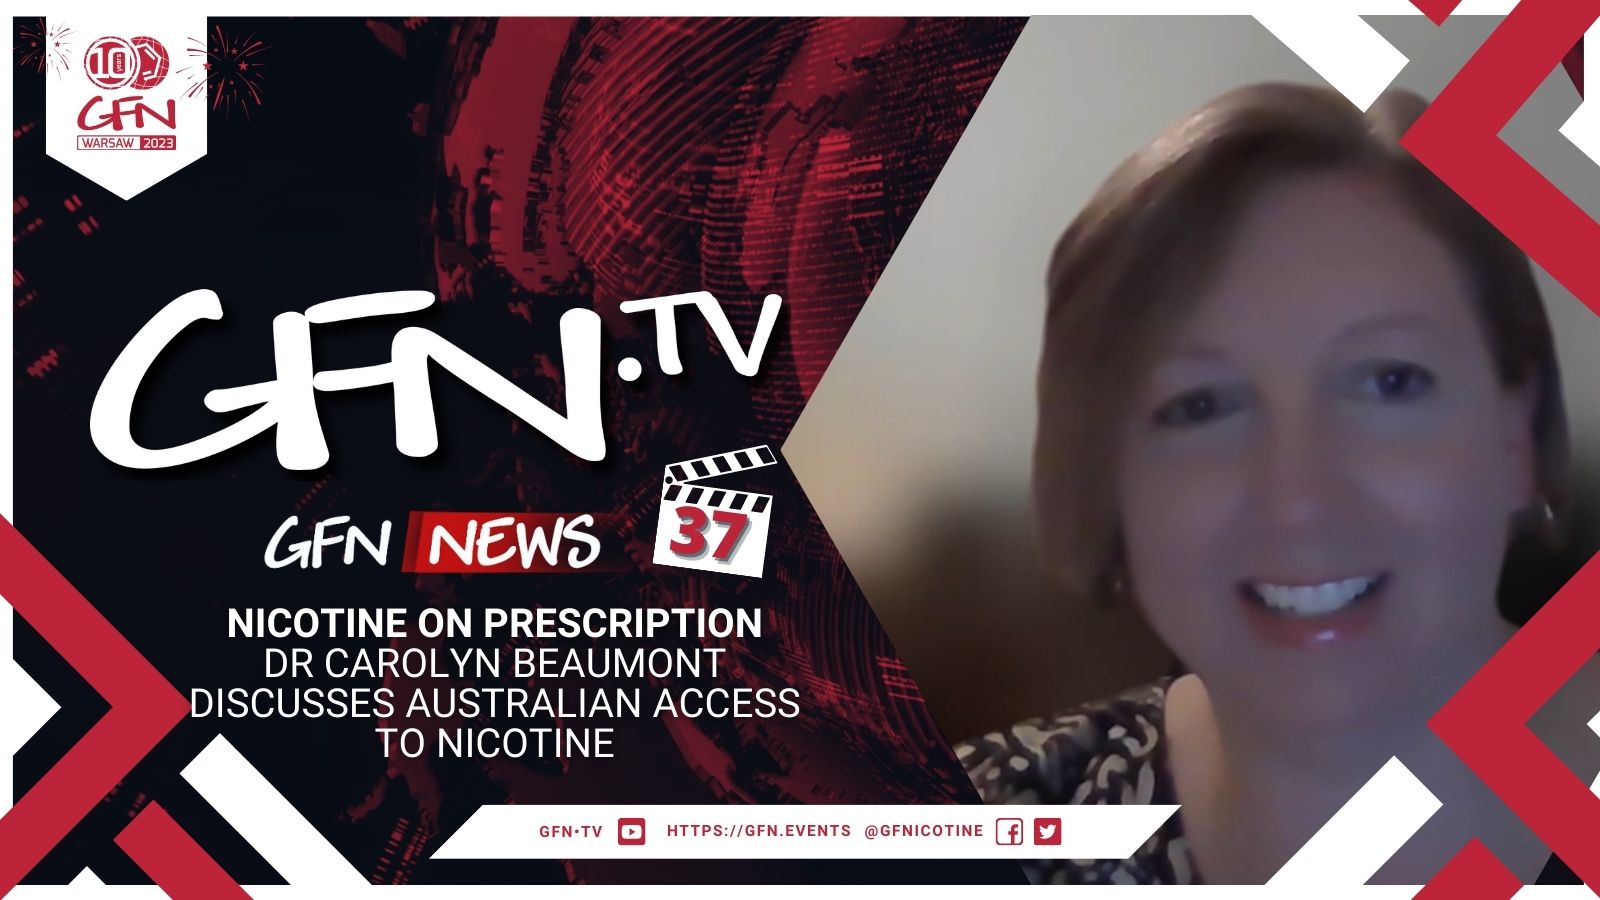 GFN News #37 | NICOTINE ON PRESCRIPTION | Dr Beaumont discusses Australian access to nicotine